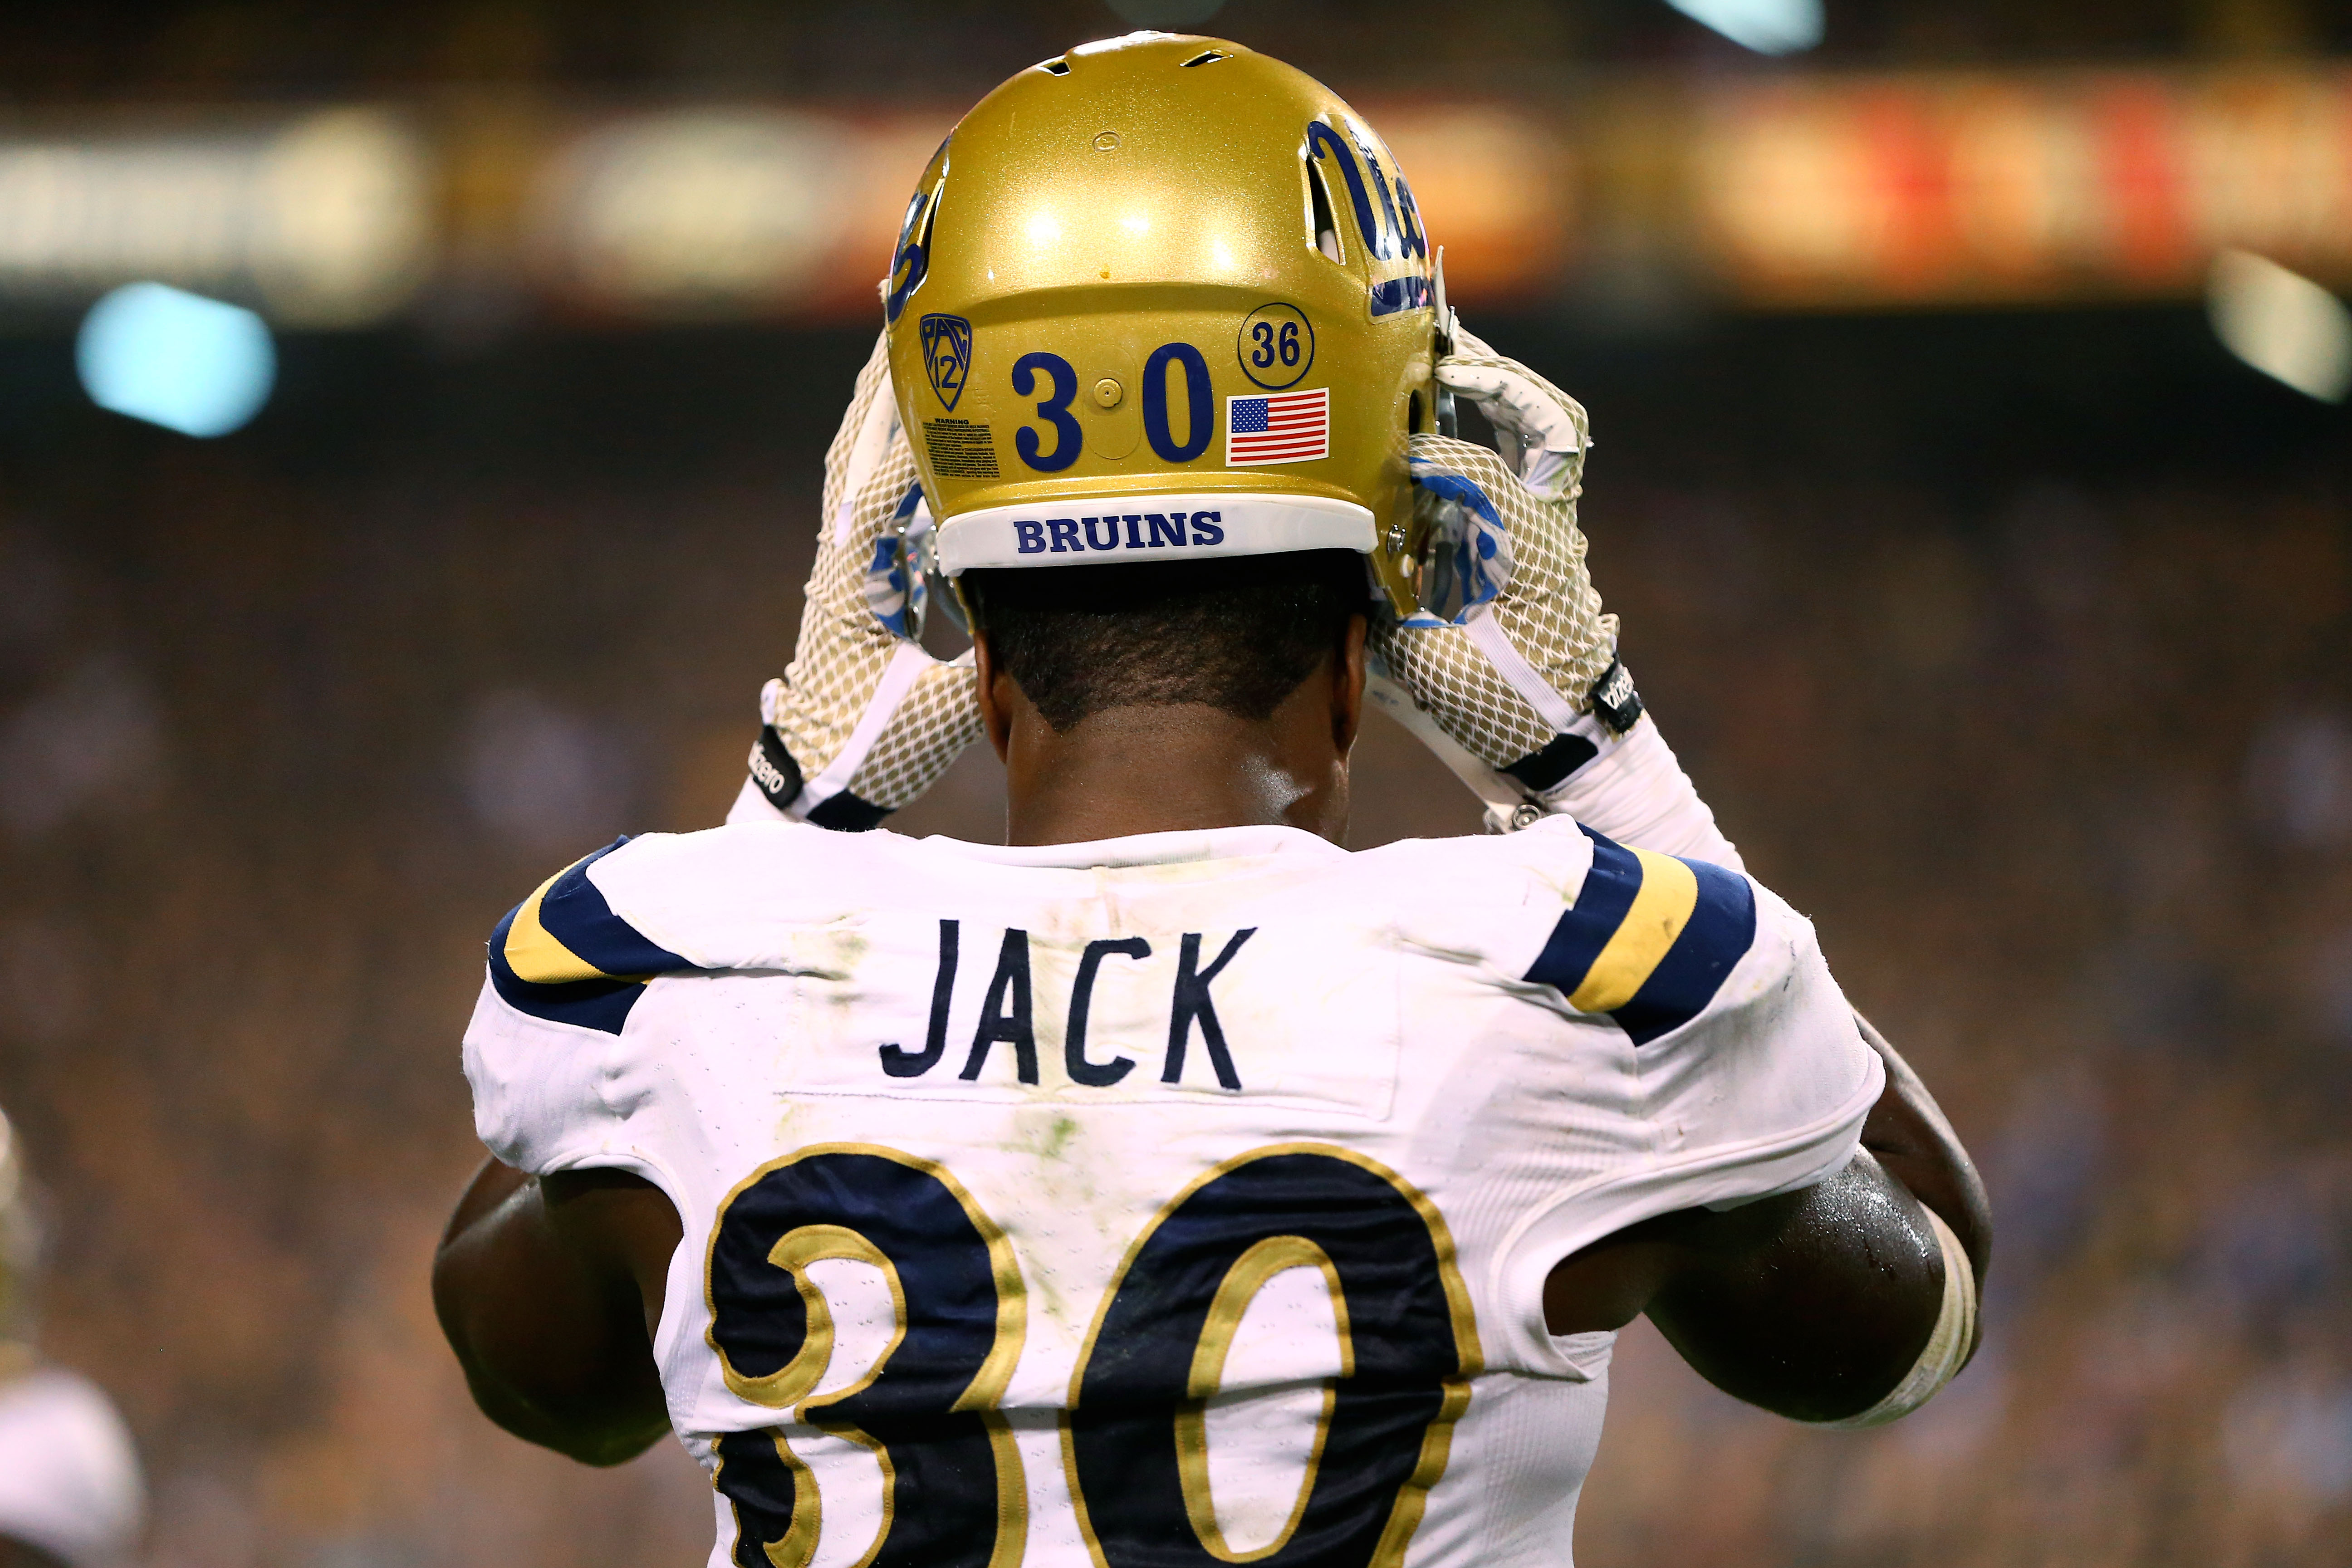 Could the Saints find their second hit of the 2016 NFL draft in Myles Jack?